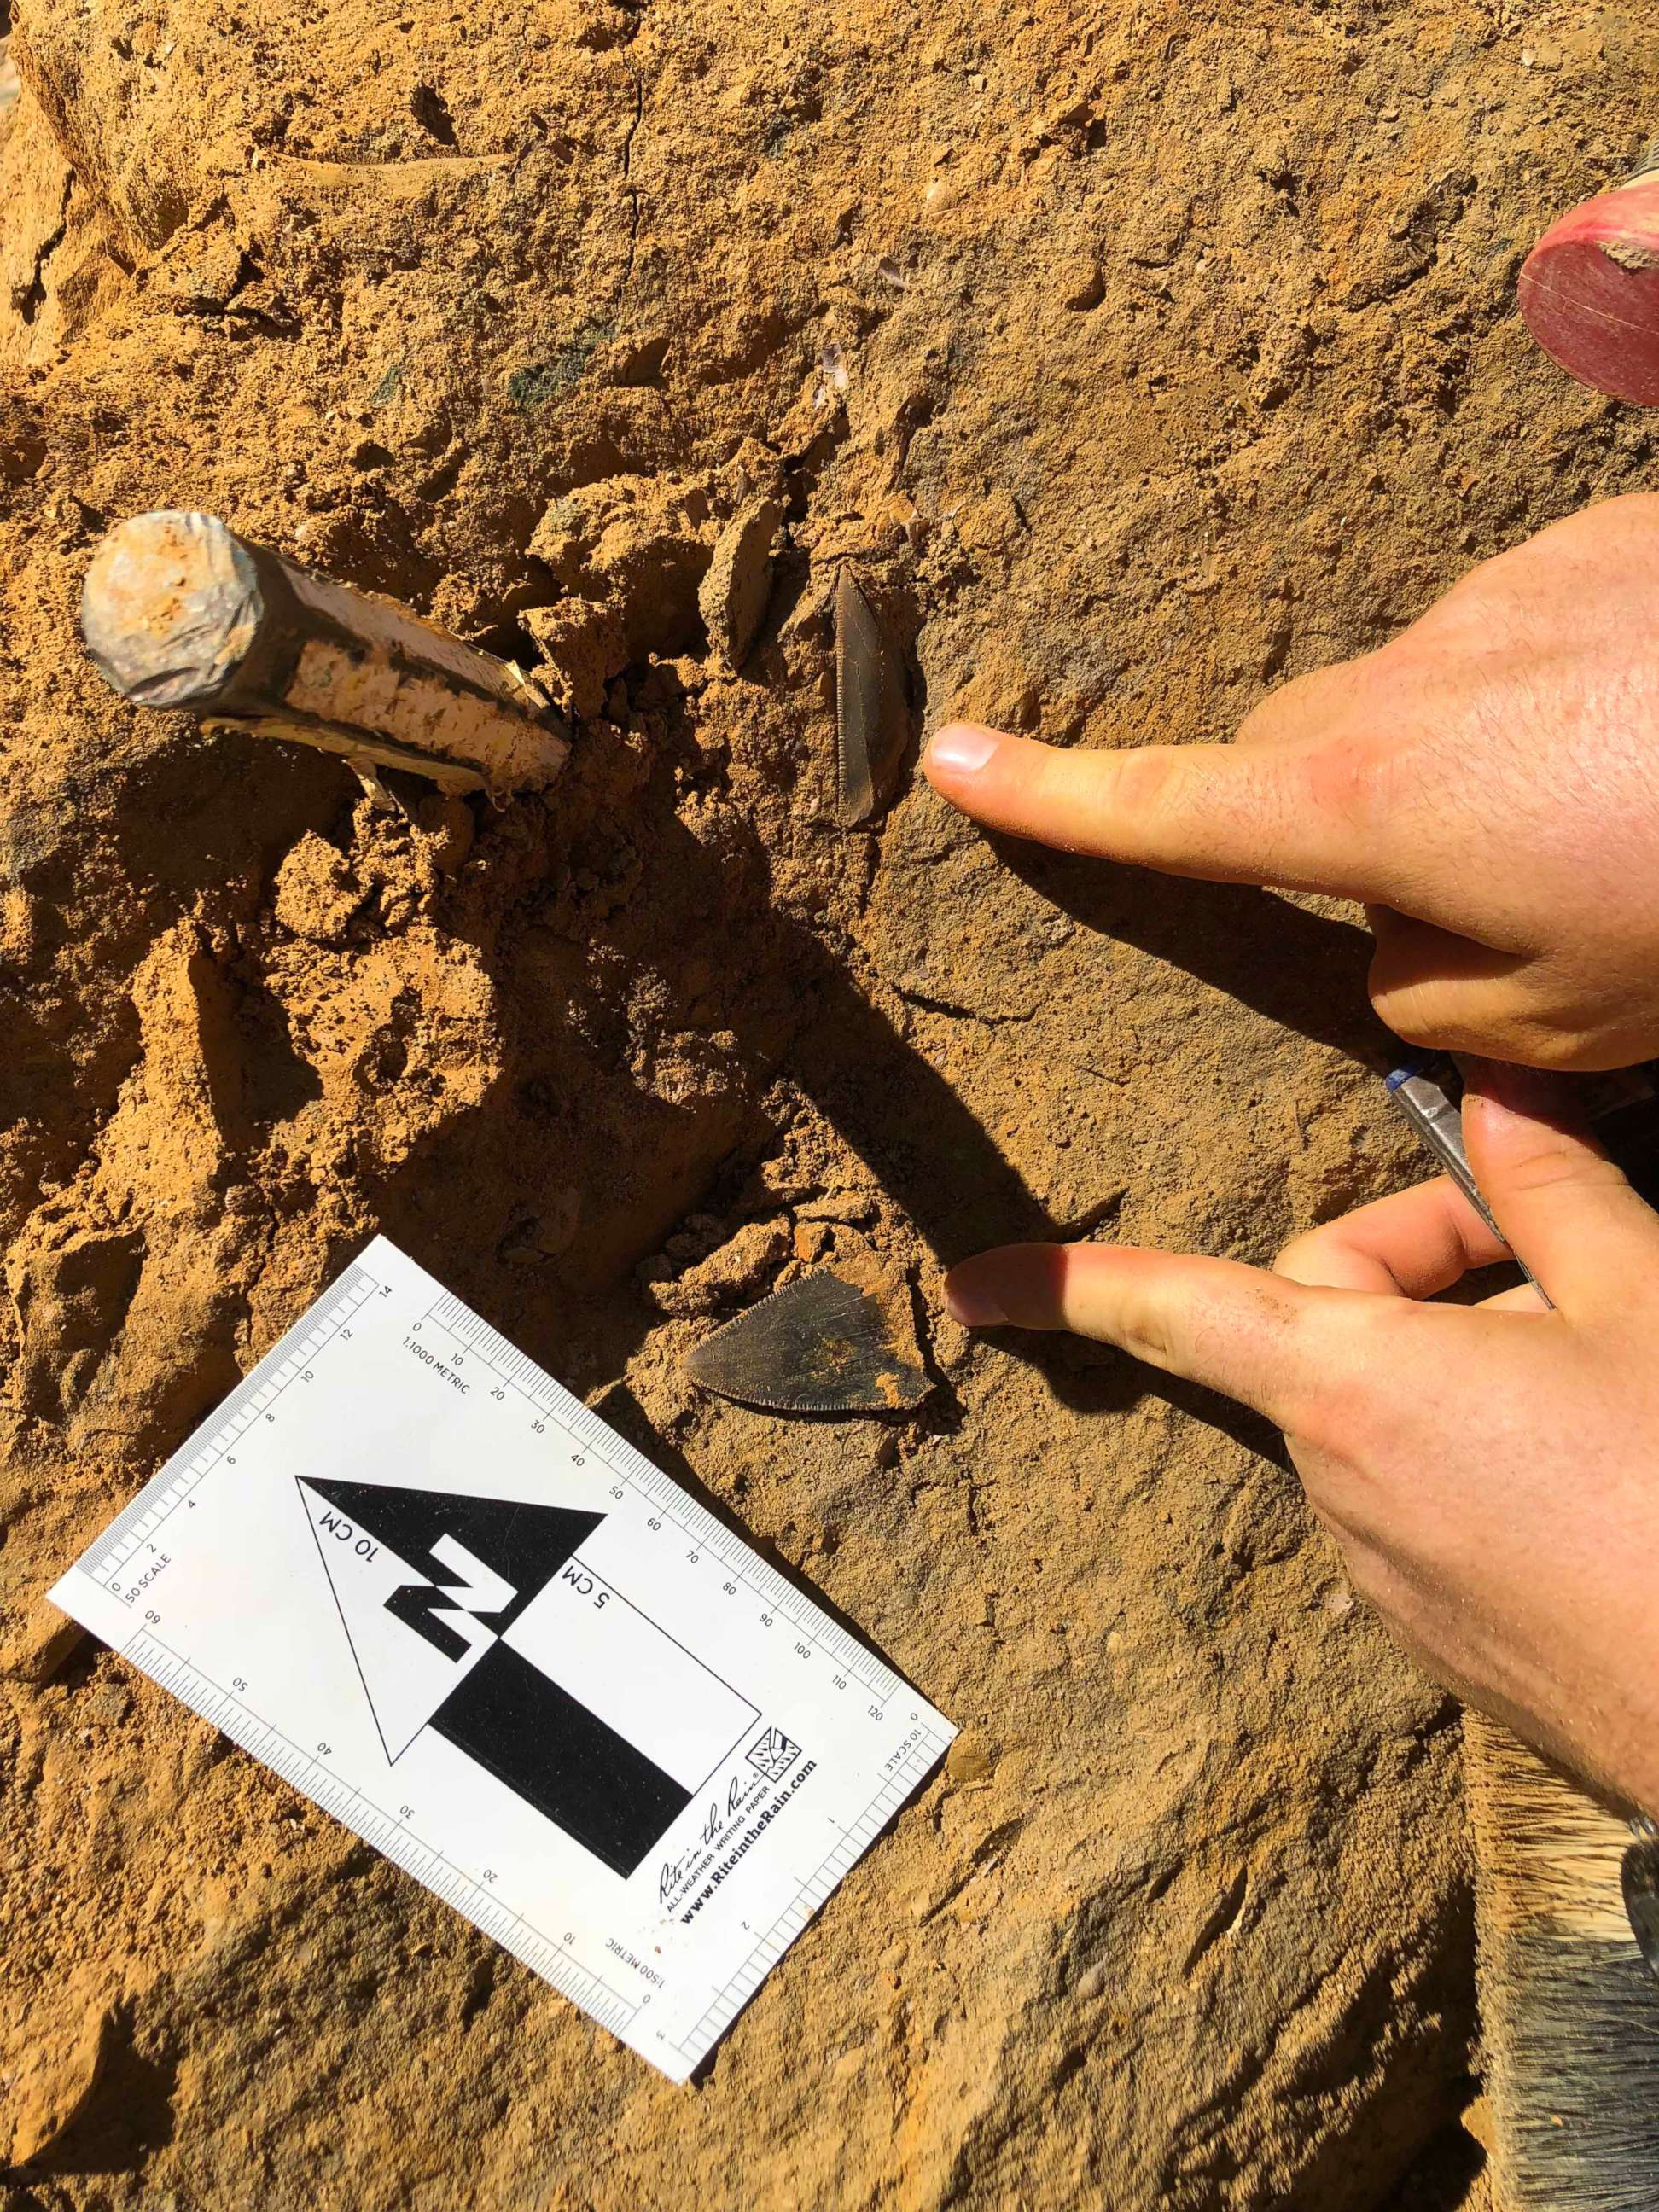 PHOTO: Philip Mullaly found a set of shark teeth in Jan Juc along Victoria's Surf Coast where a team of paleontologists at Museums Victoria excavated the fossils.